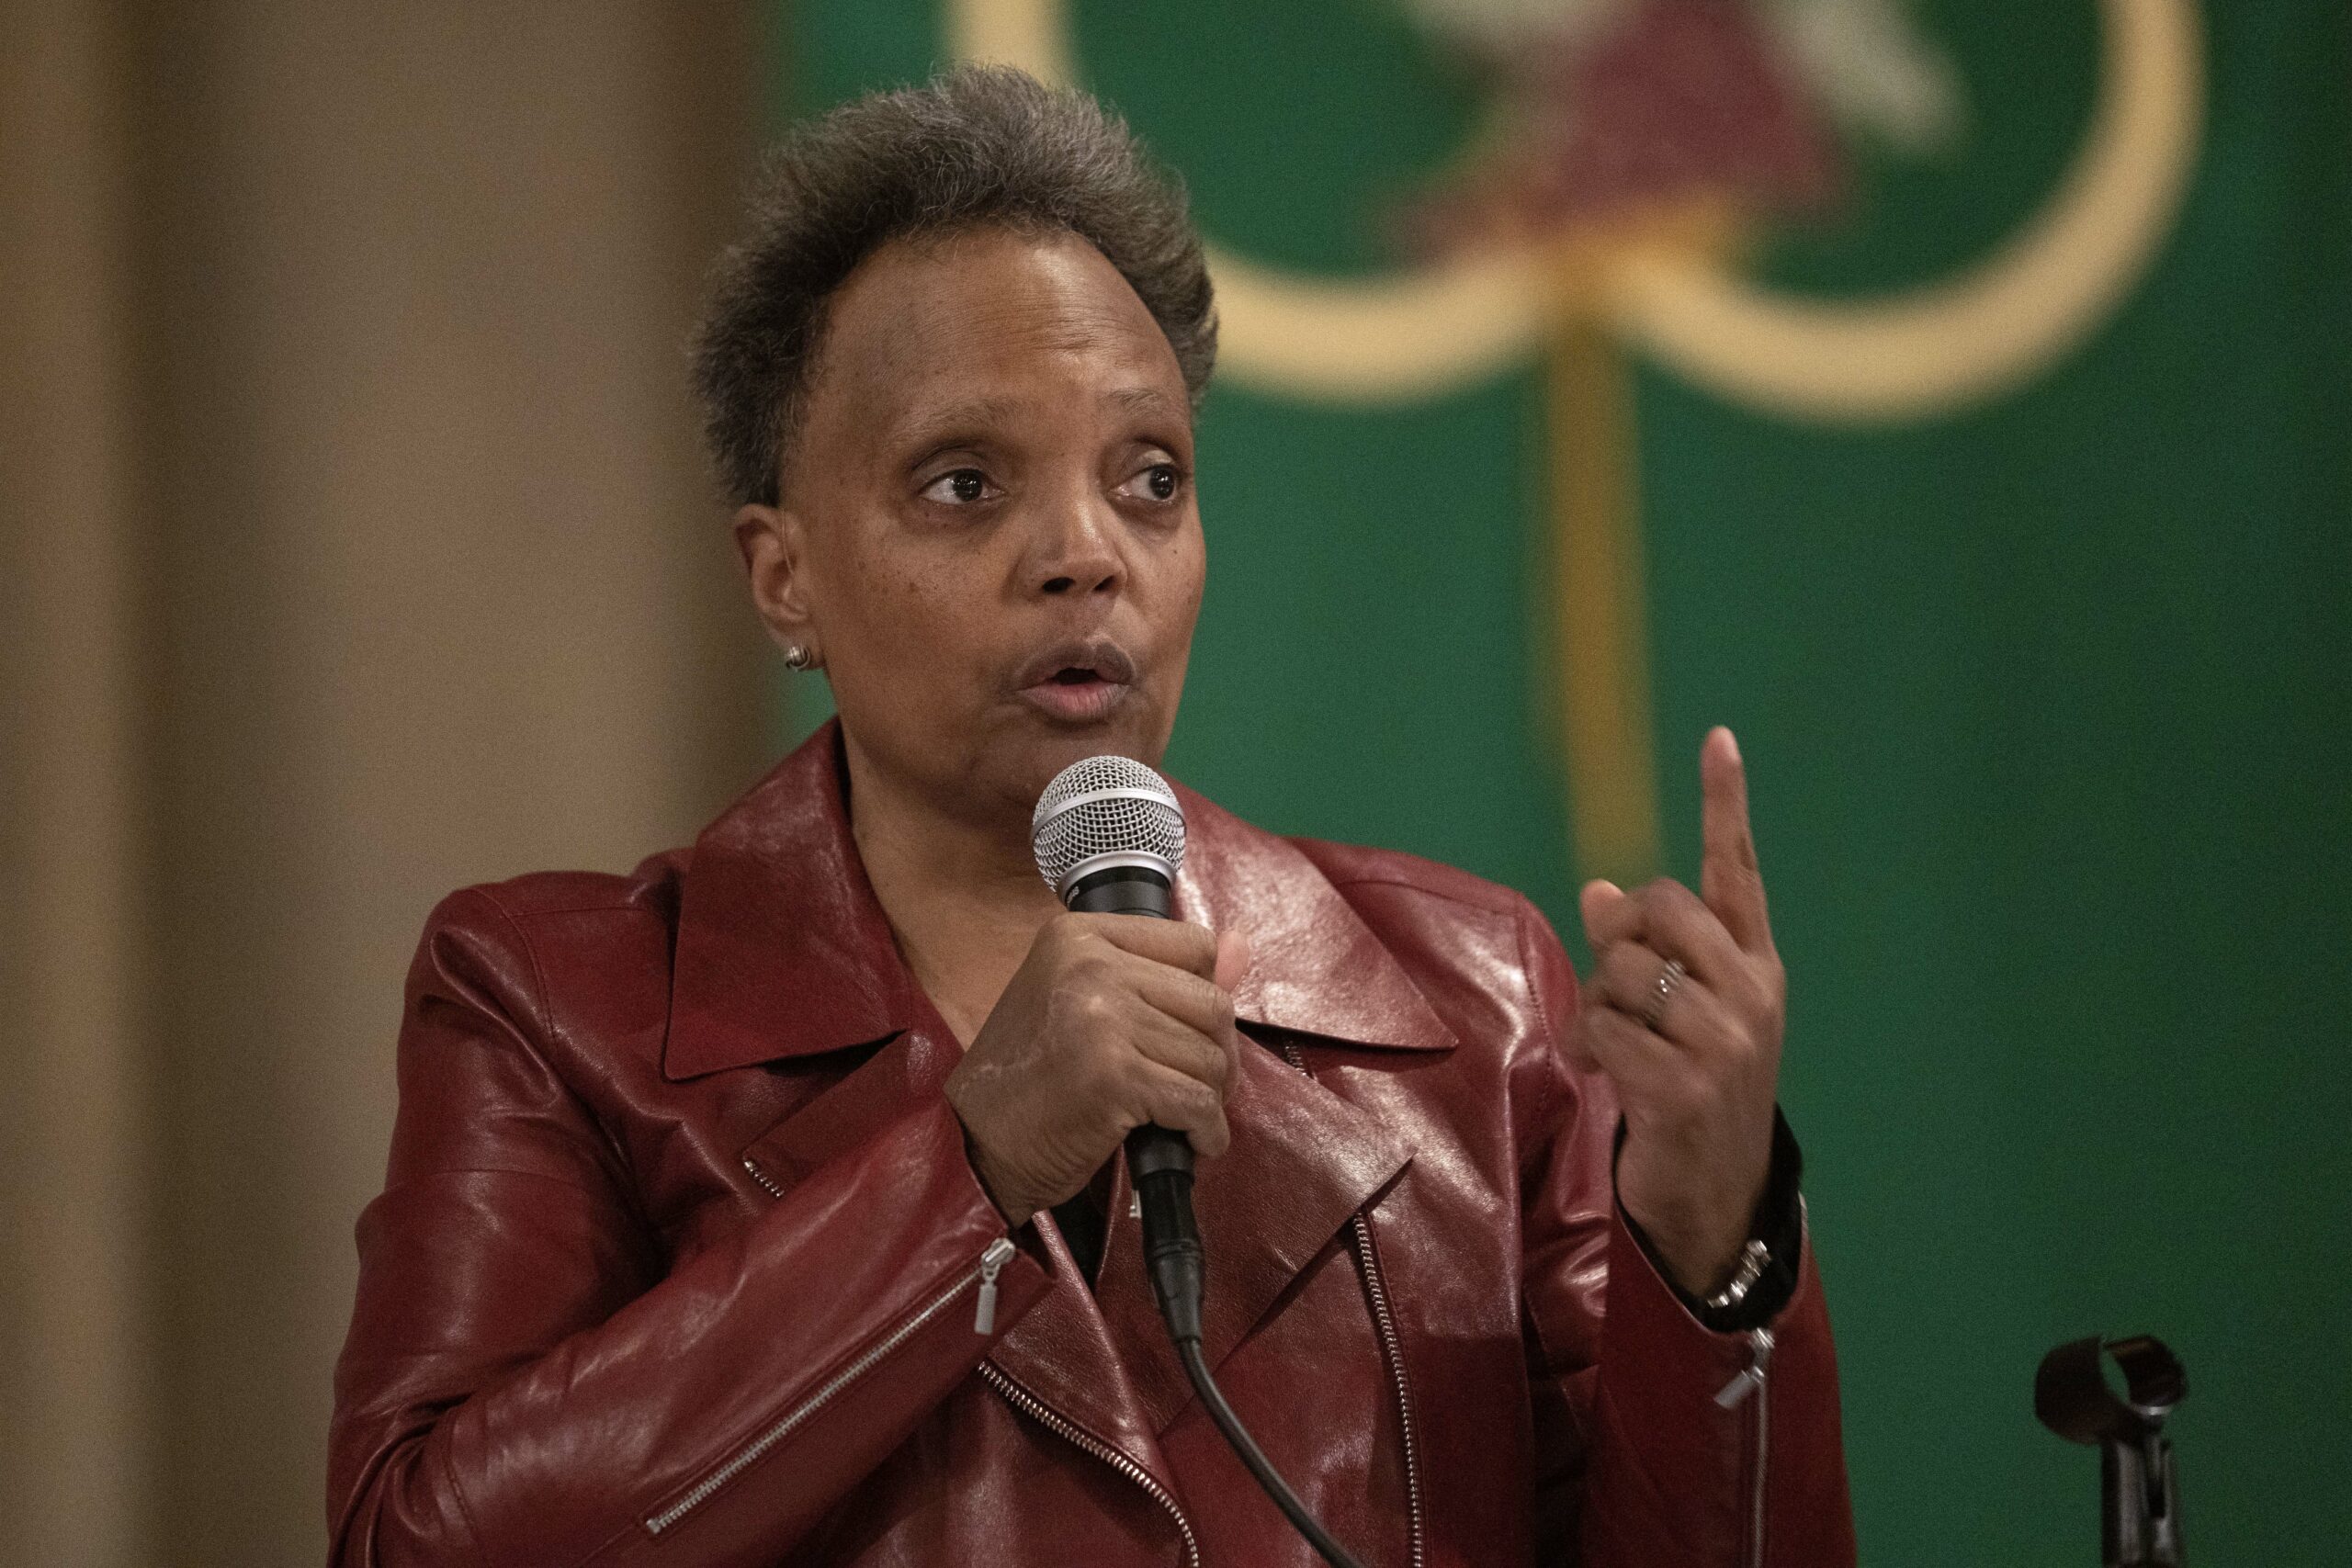 Lori Lightfoot criticized for viral dancing video amid rising crime